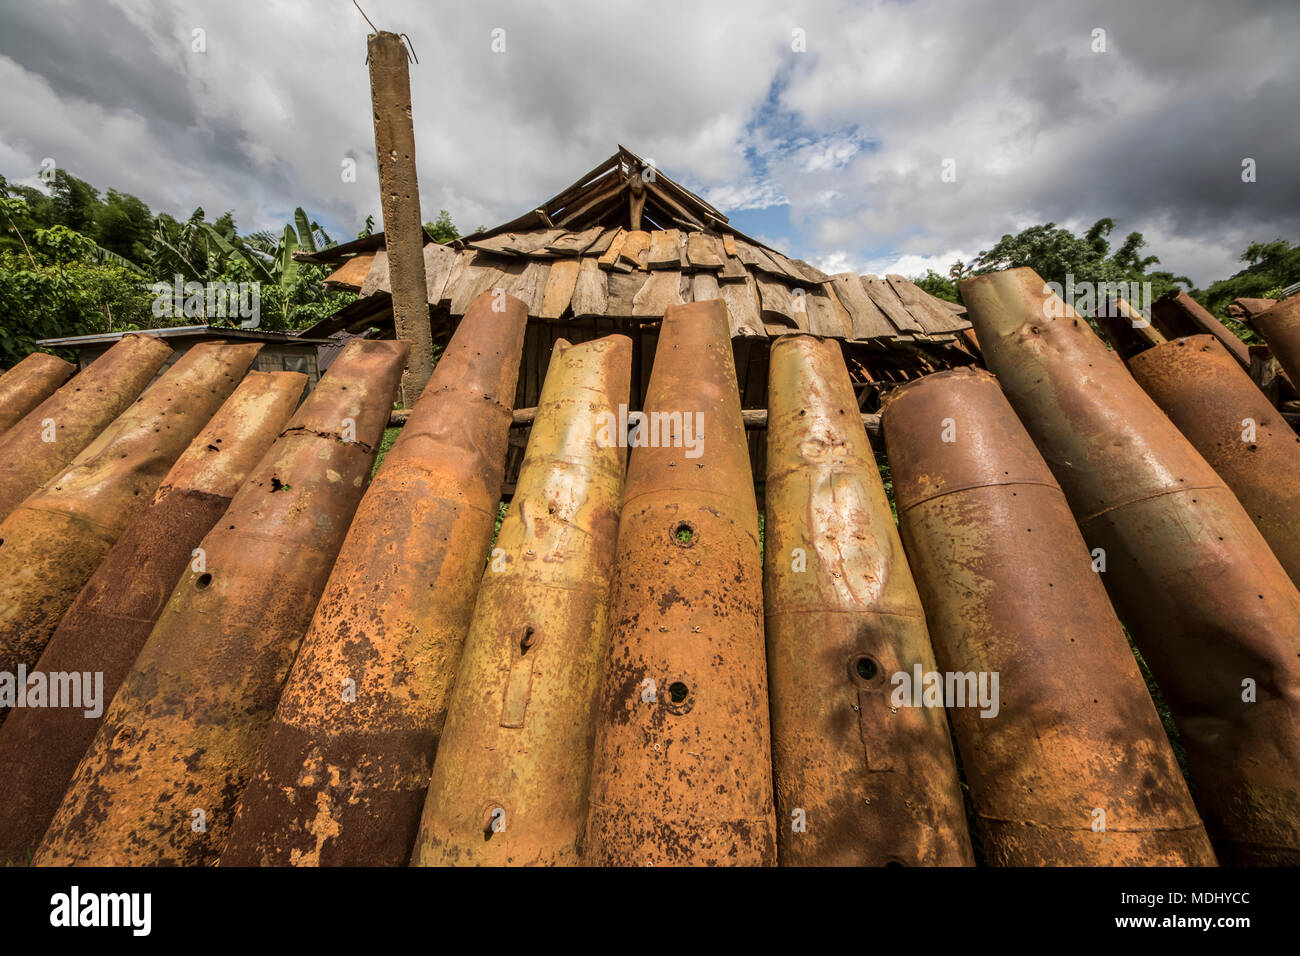 Wall made from bomb casings in Na Kam Peng, also called Bomb Village; Na Kam Peng, Xiangkhouang, Laos Stock Photo